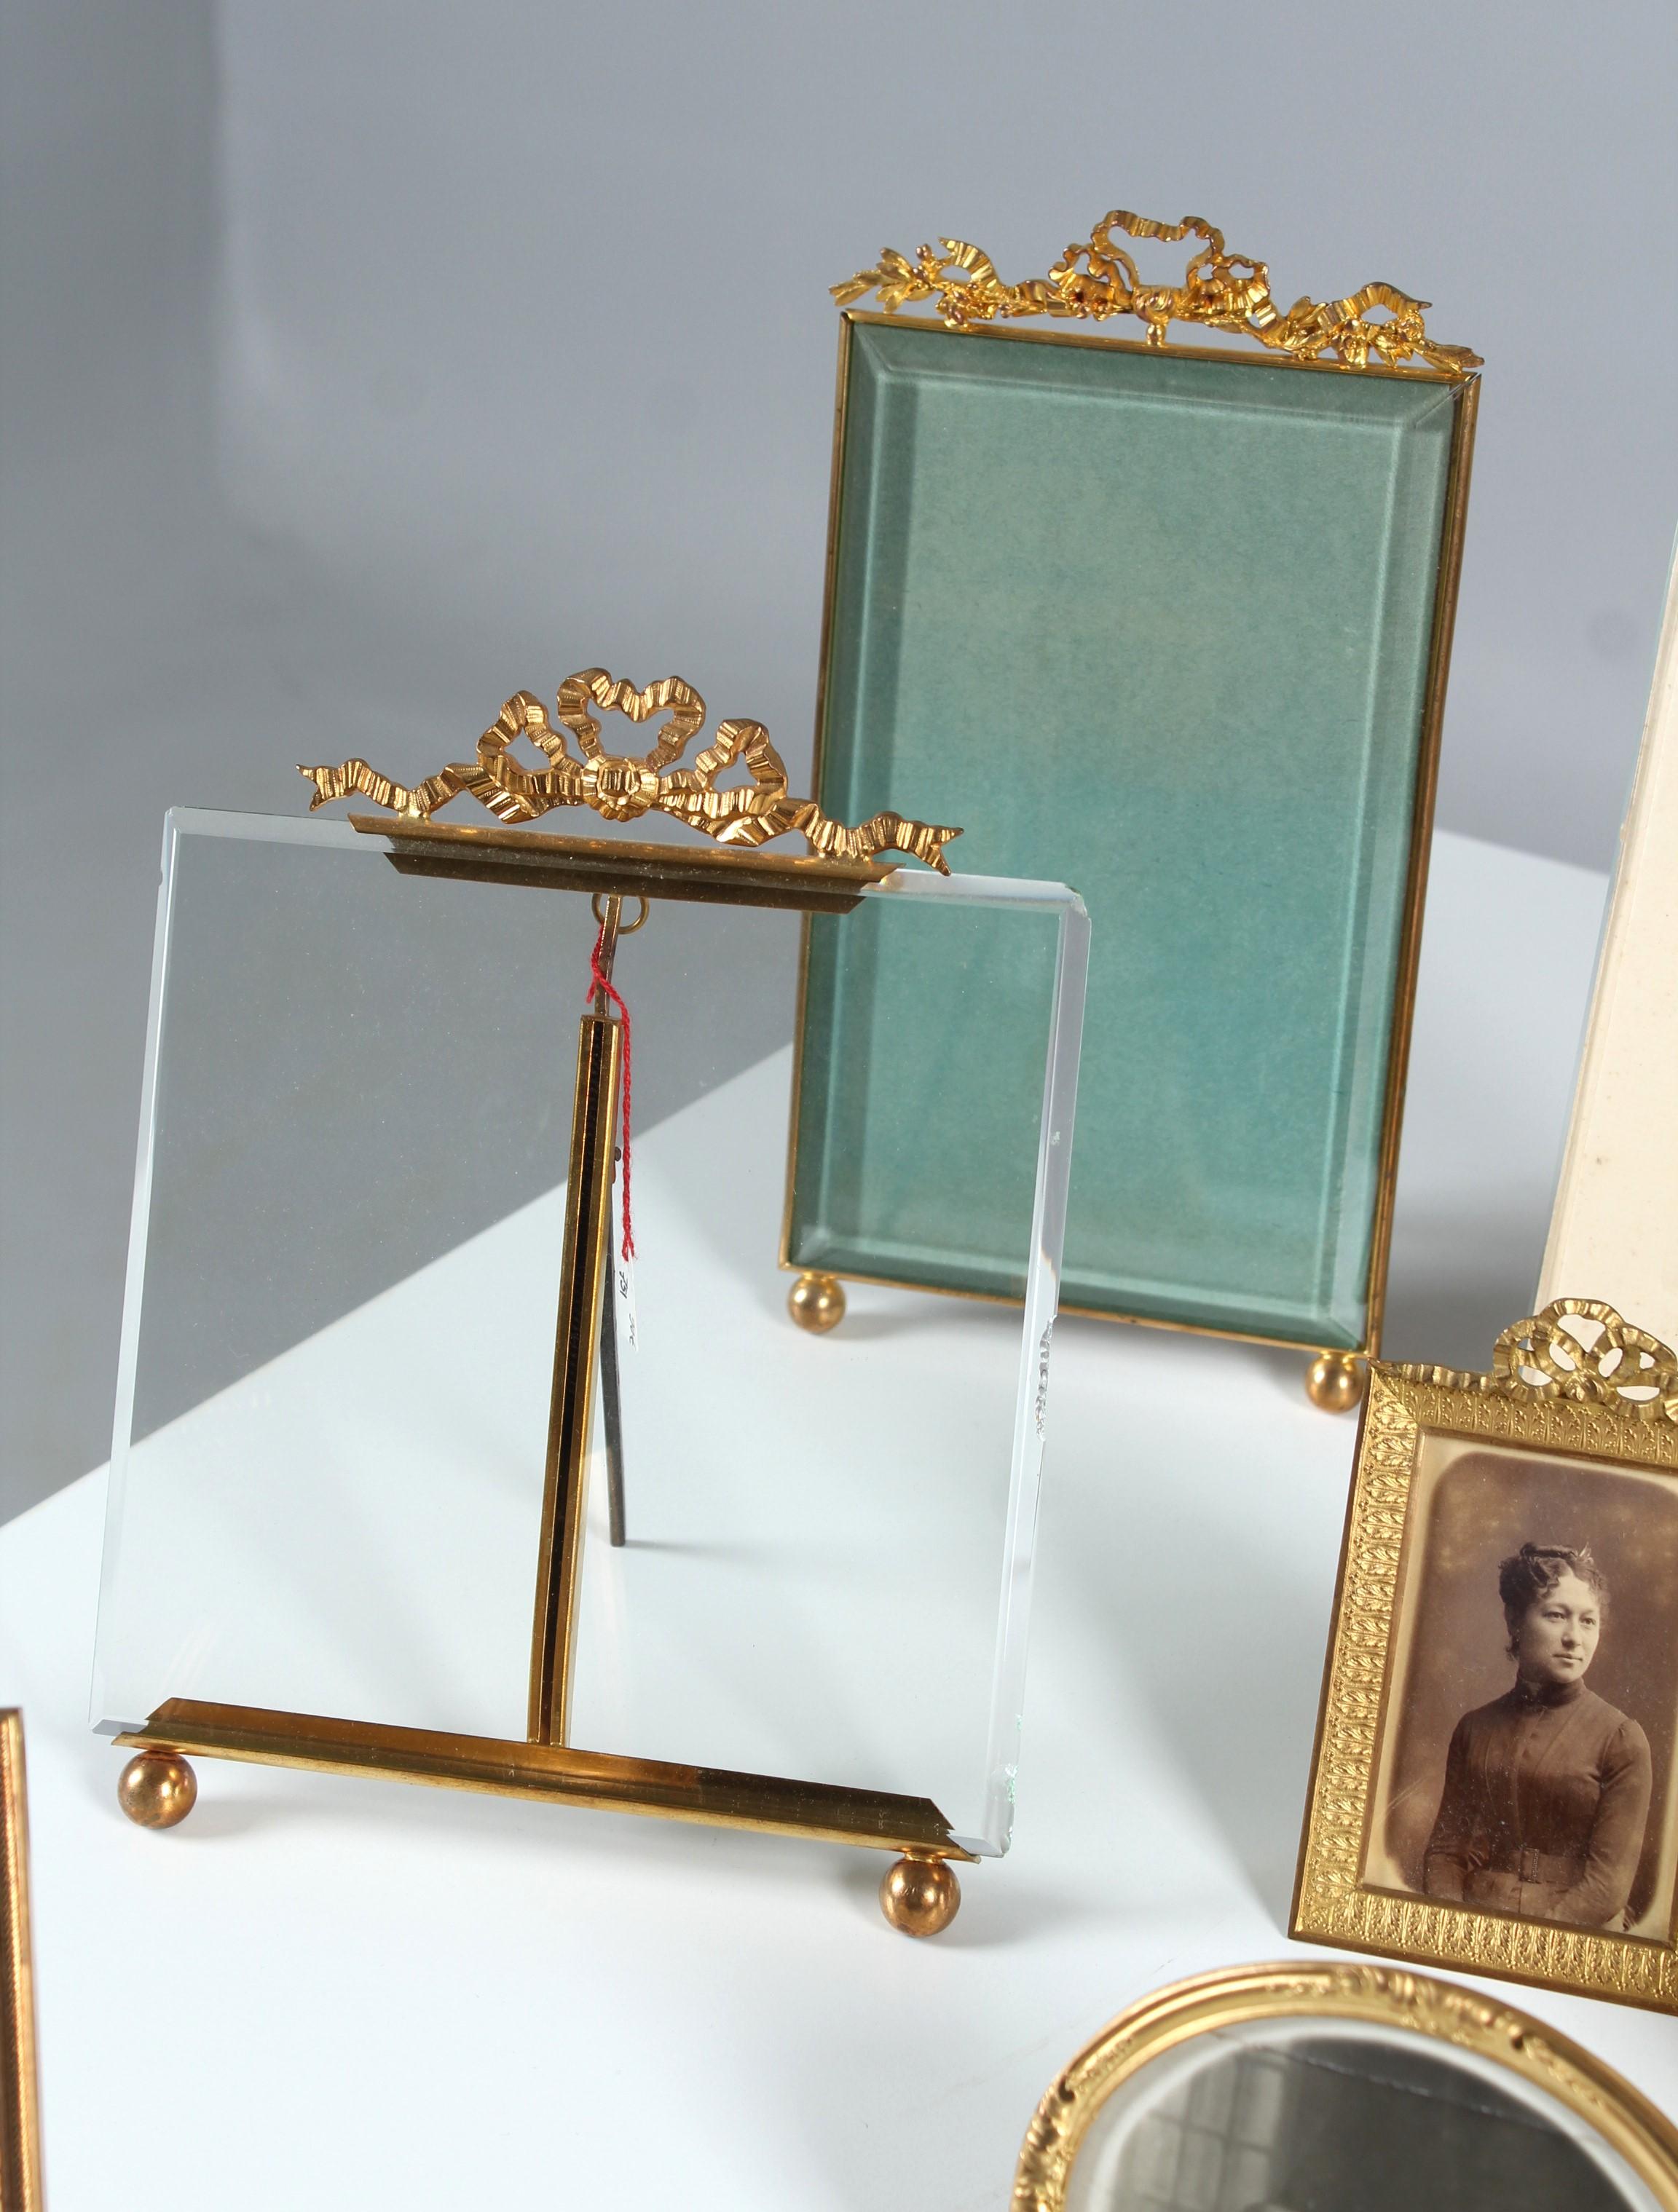 Set of 10 Picture Frames, Art Nouveau, Neoclassicism, 19th - 20th Century In Good Condition For Sale In Greven, DE